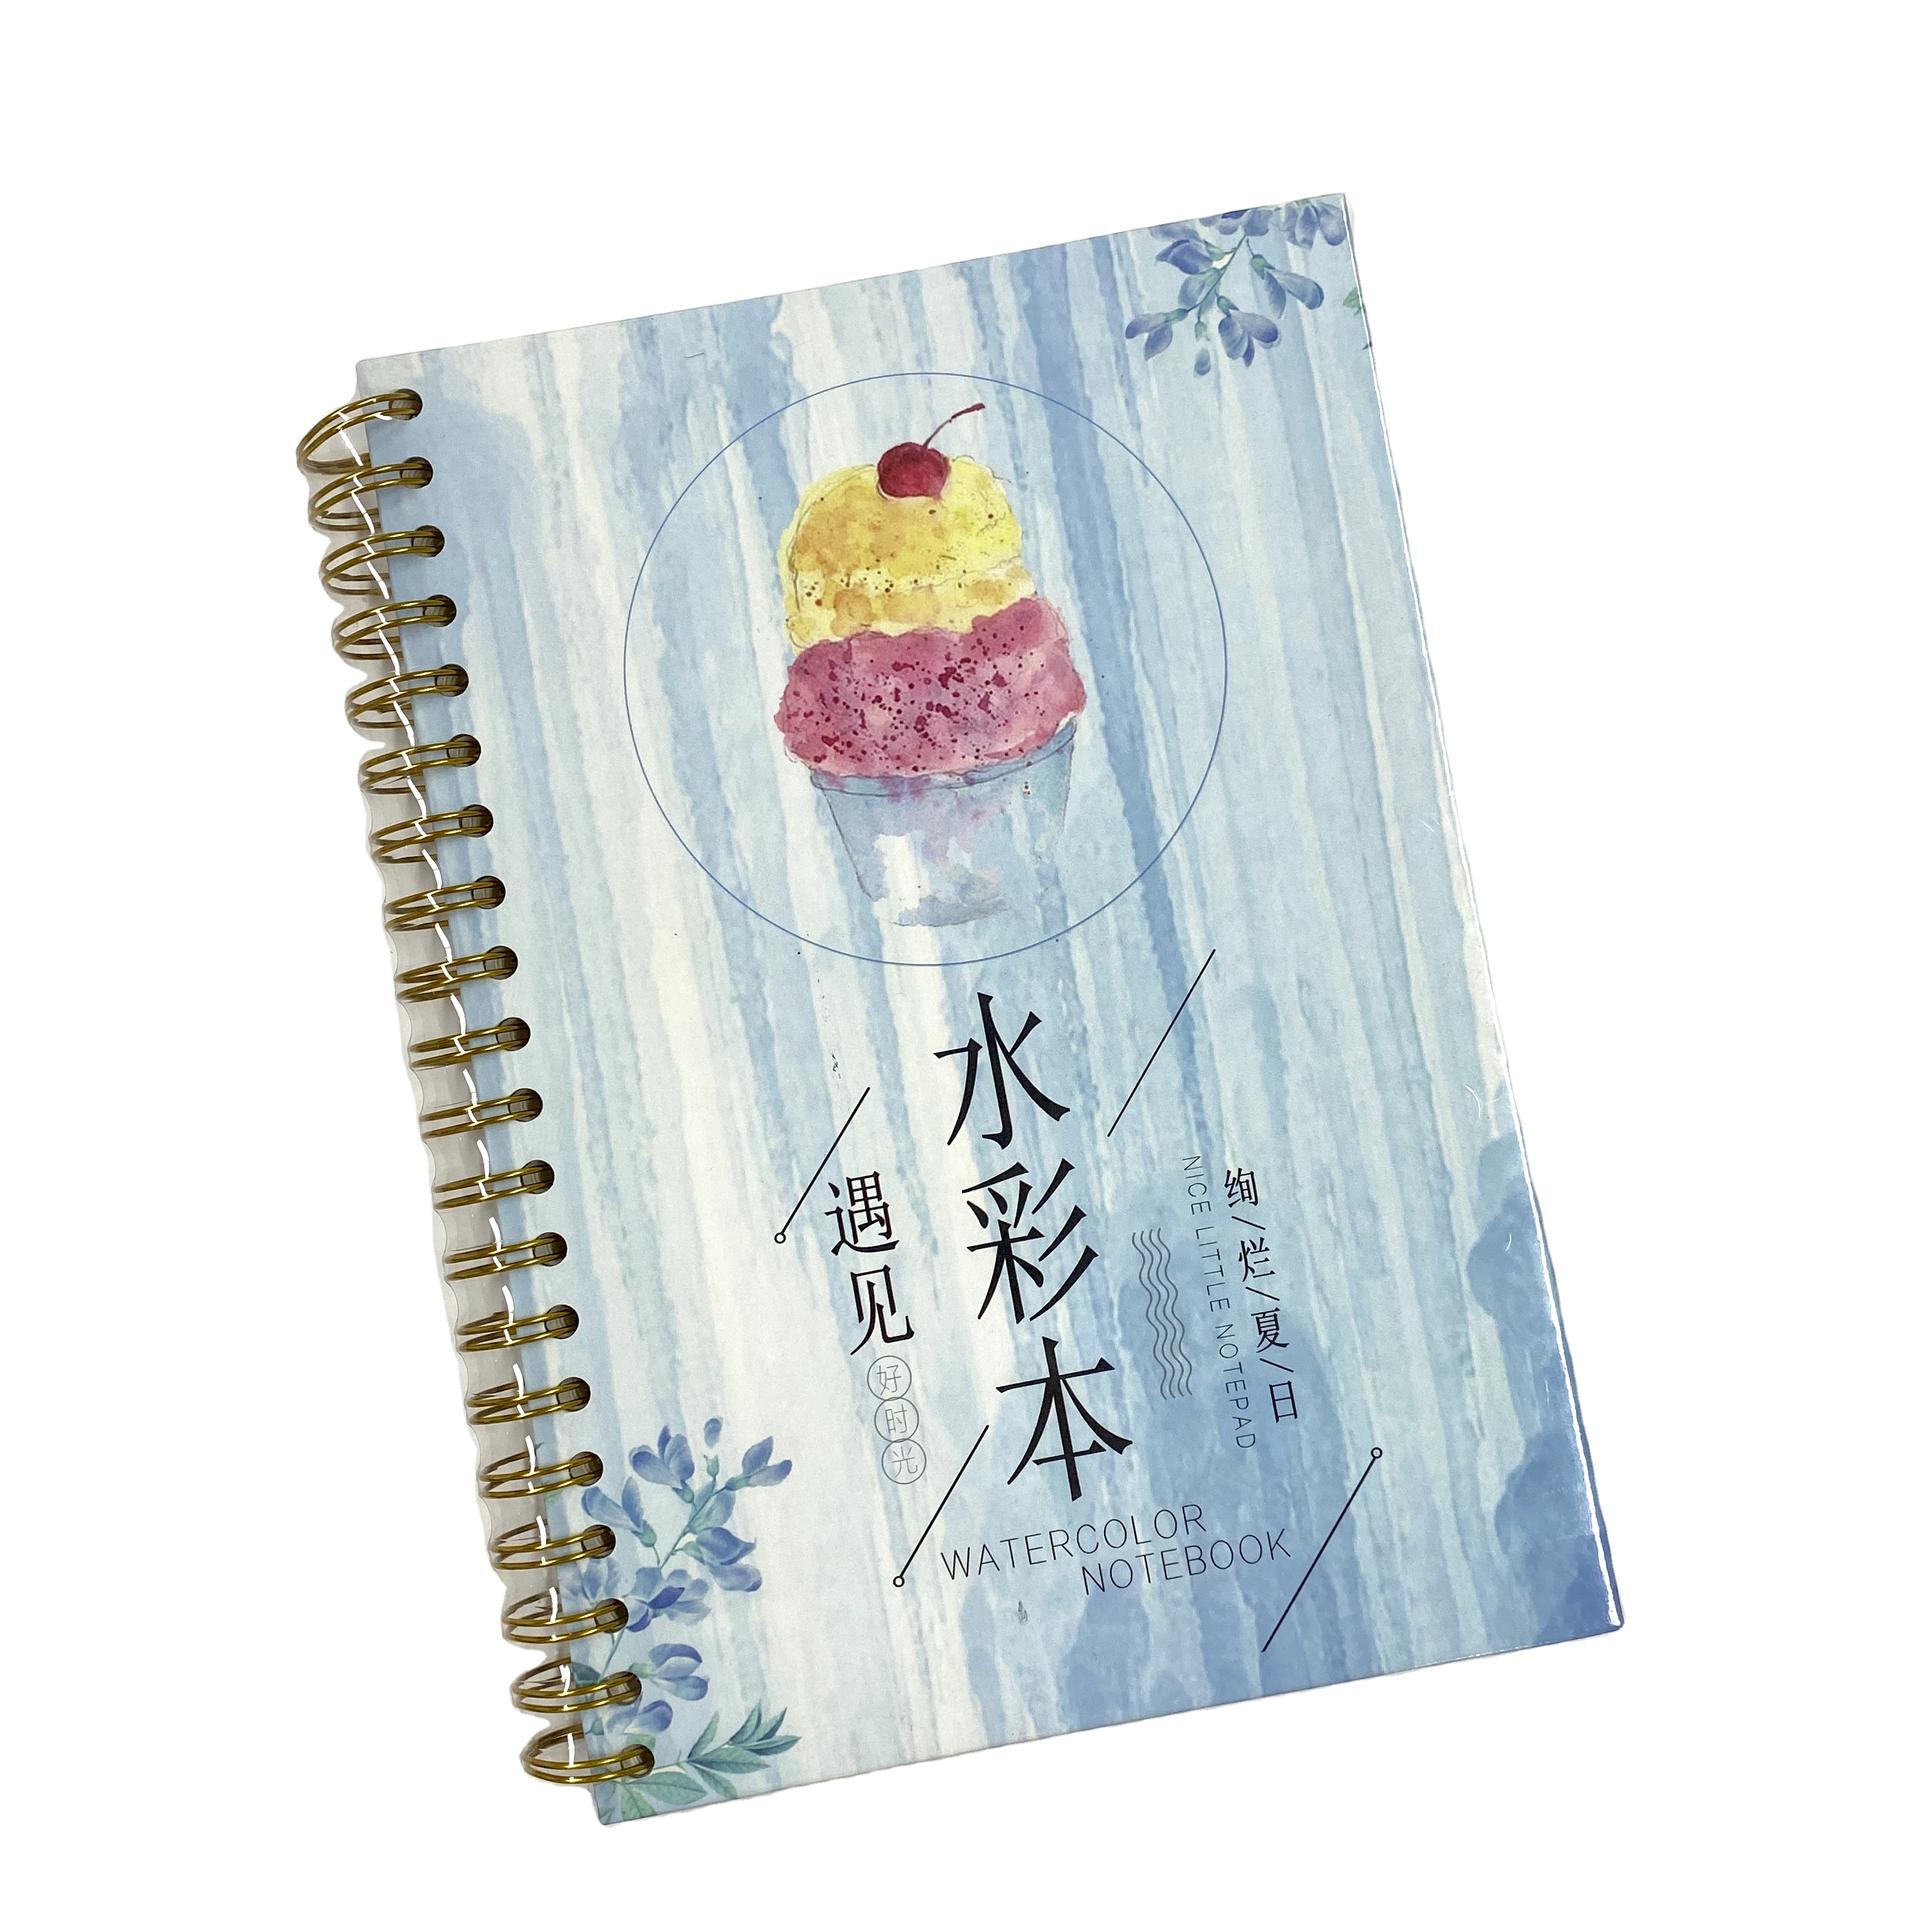 product-Custom Handmade Watercolor Books Painting Book With Watercolor Pen Notebook With Nice Paper -1